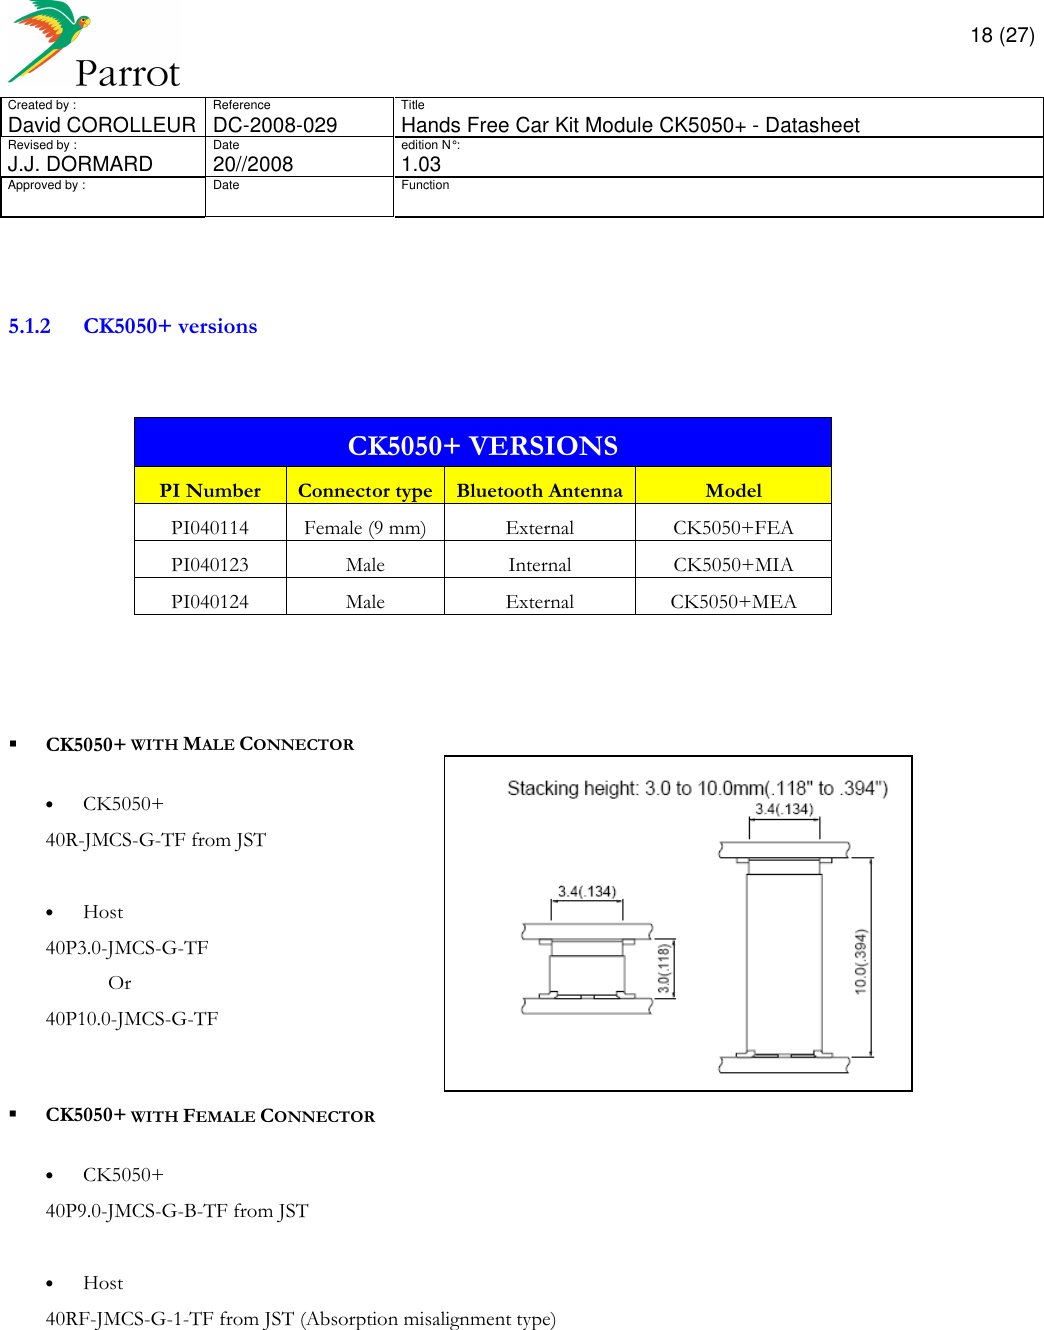       18 (27) Created by :  Reference  Title David COROLLEUR  DC-2008-029  Hands Free Car Kit Module CK5050+ - Datasheet  Revised by :  Date  edition N° :  J.J. DORMARD  20//2008   1.03 Approved by :  Date  Function                   5.1.2 CK5050+ versions     CK5050+ VERSIONS  PI Number  Connector type Bluetooth Antenna Model PI040114  Female (9 mm)  External  CK5050+FEA PI040123  Male  Internal  CK5050+MIA PI040124  Male  External  CK5050+MEA       CK5050+ WITH MALE CONNECTOR  • CK5050+ 40R-JMCS-G-TF from JST  • Host 40P3.0-JMCS-G-TF        Or 40P10.0-JMCS-G-TF    CK5050+ WITH FEMALE CONNECTOR  • CK5050+ 40P9.0-JMCS-G-B-TF from JST  • Host 40RF-JMCS-G-1-TF from JST (Absorption misalignment type)   